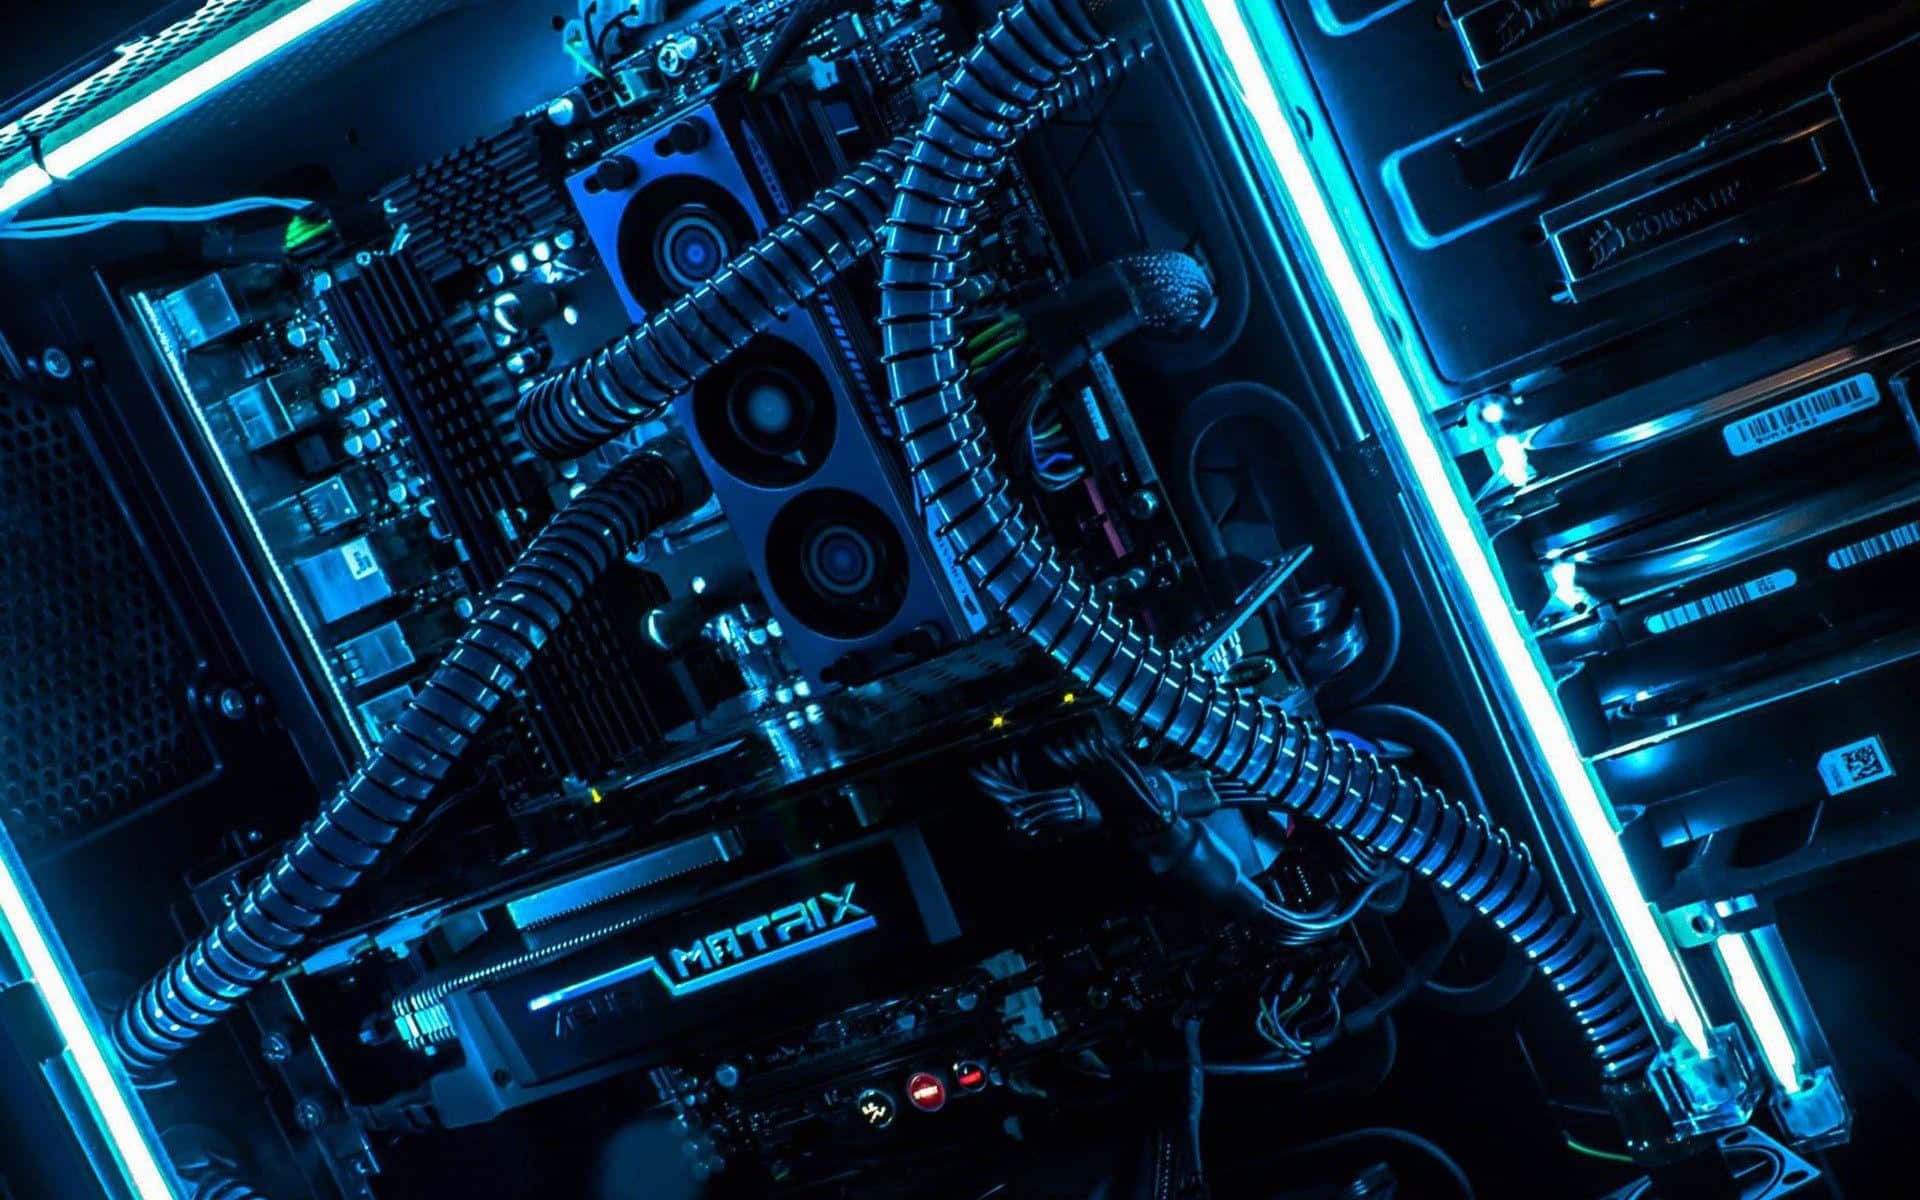 A Computer Case With Blue Lights And Cables